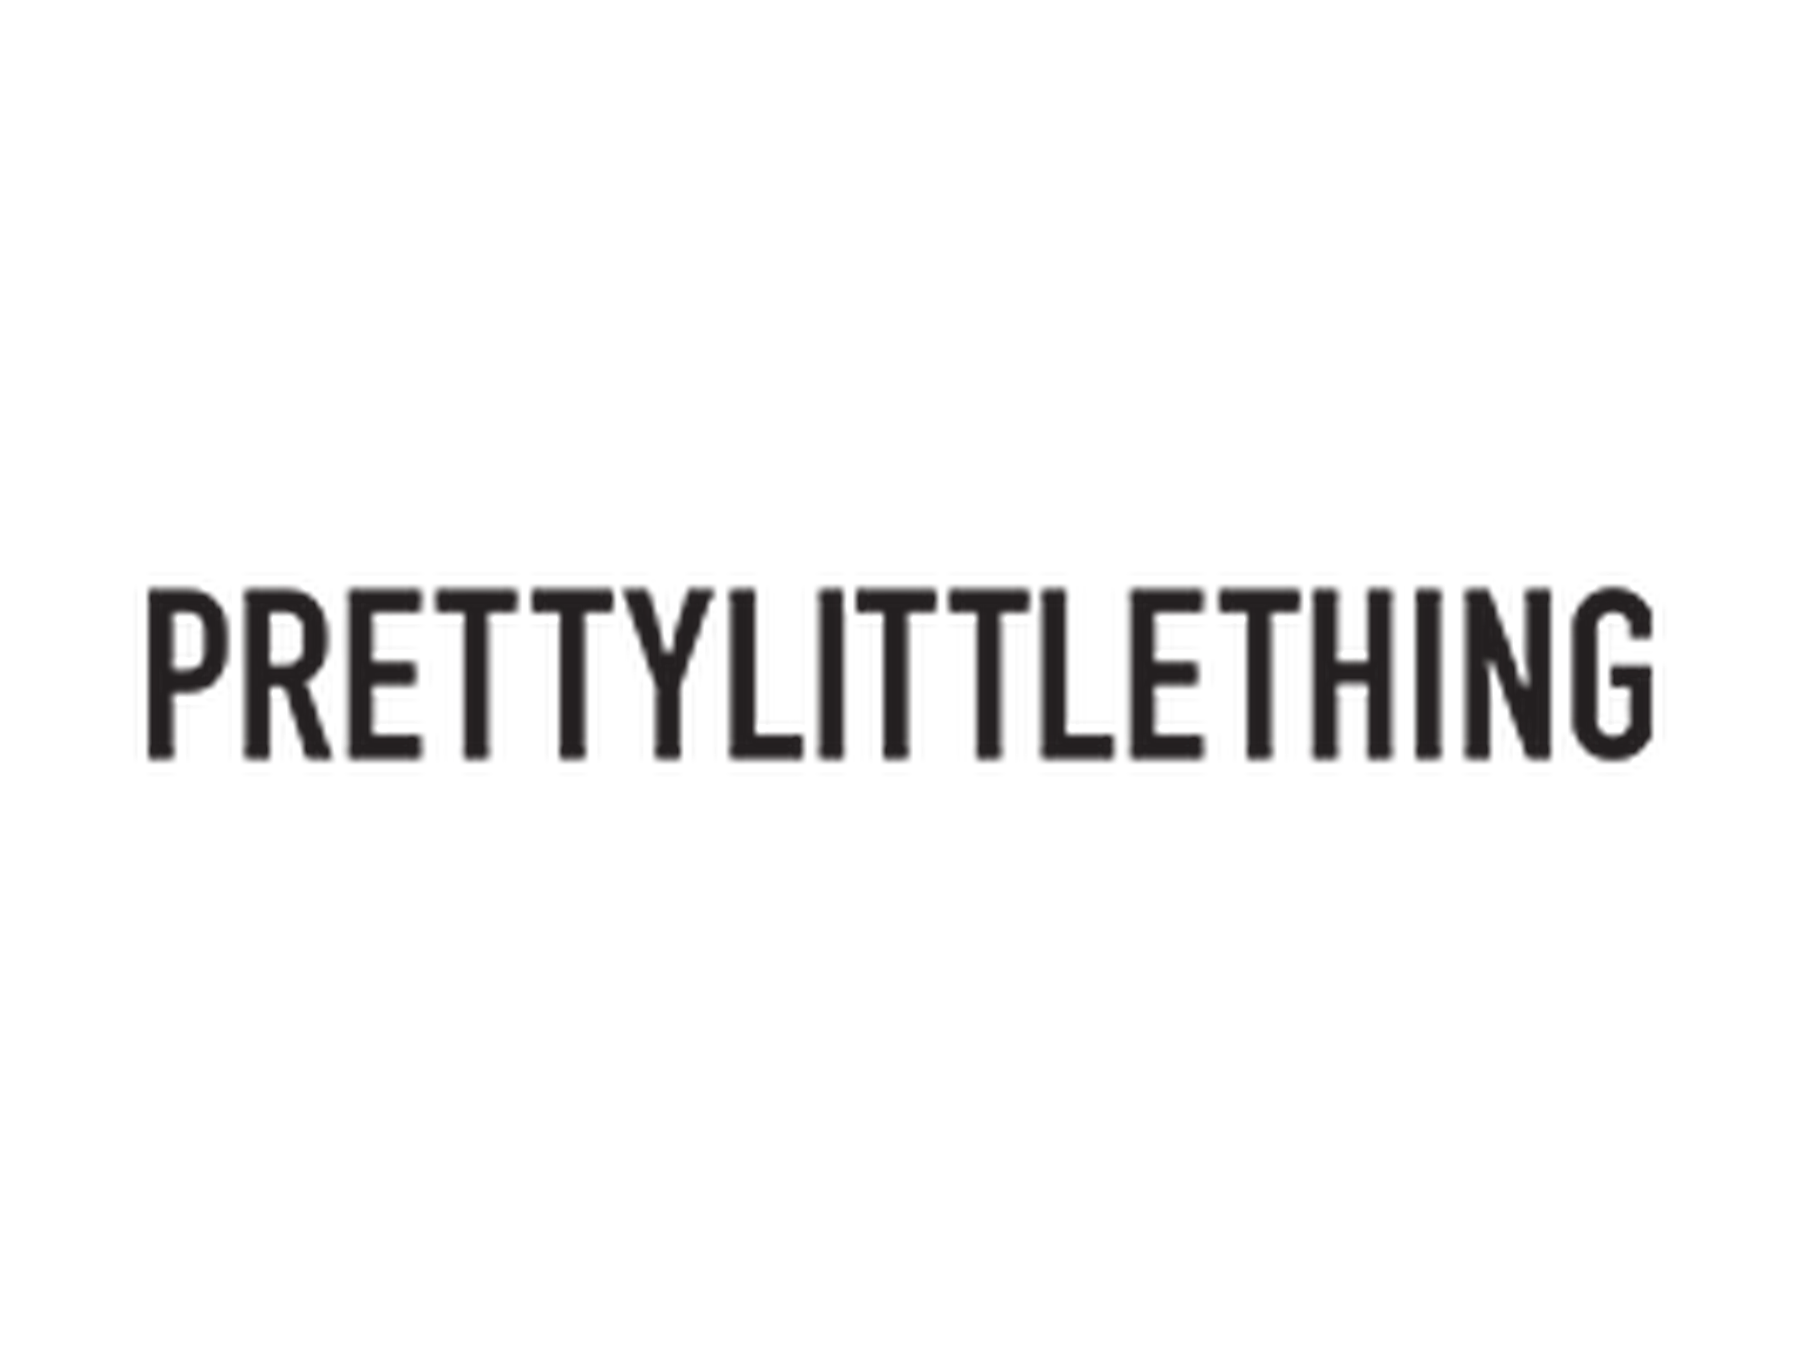 Pretty Little Thing discount code